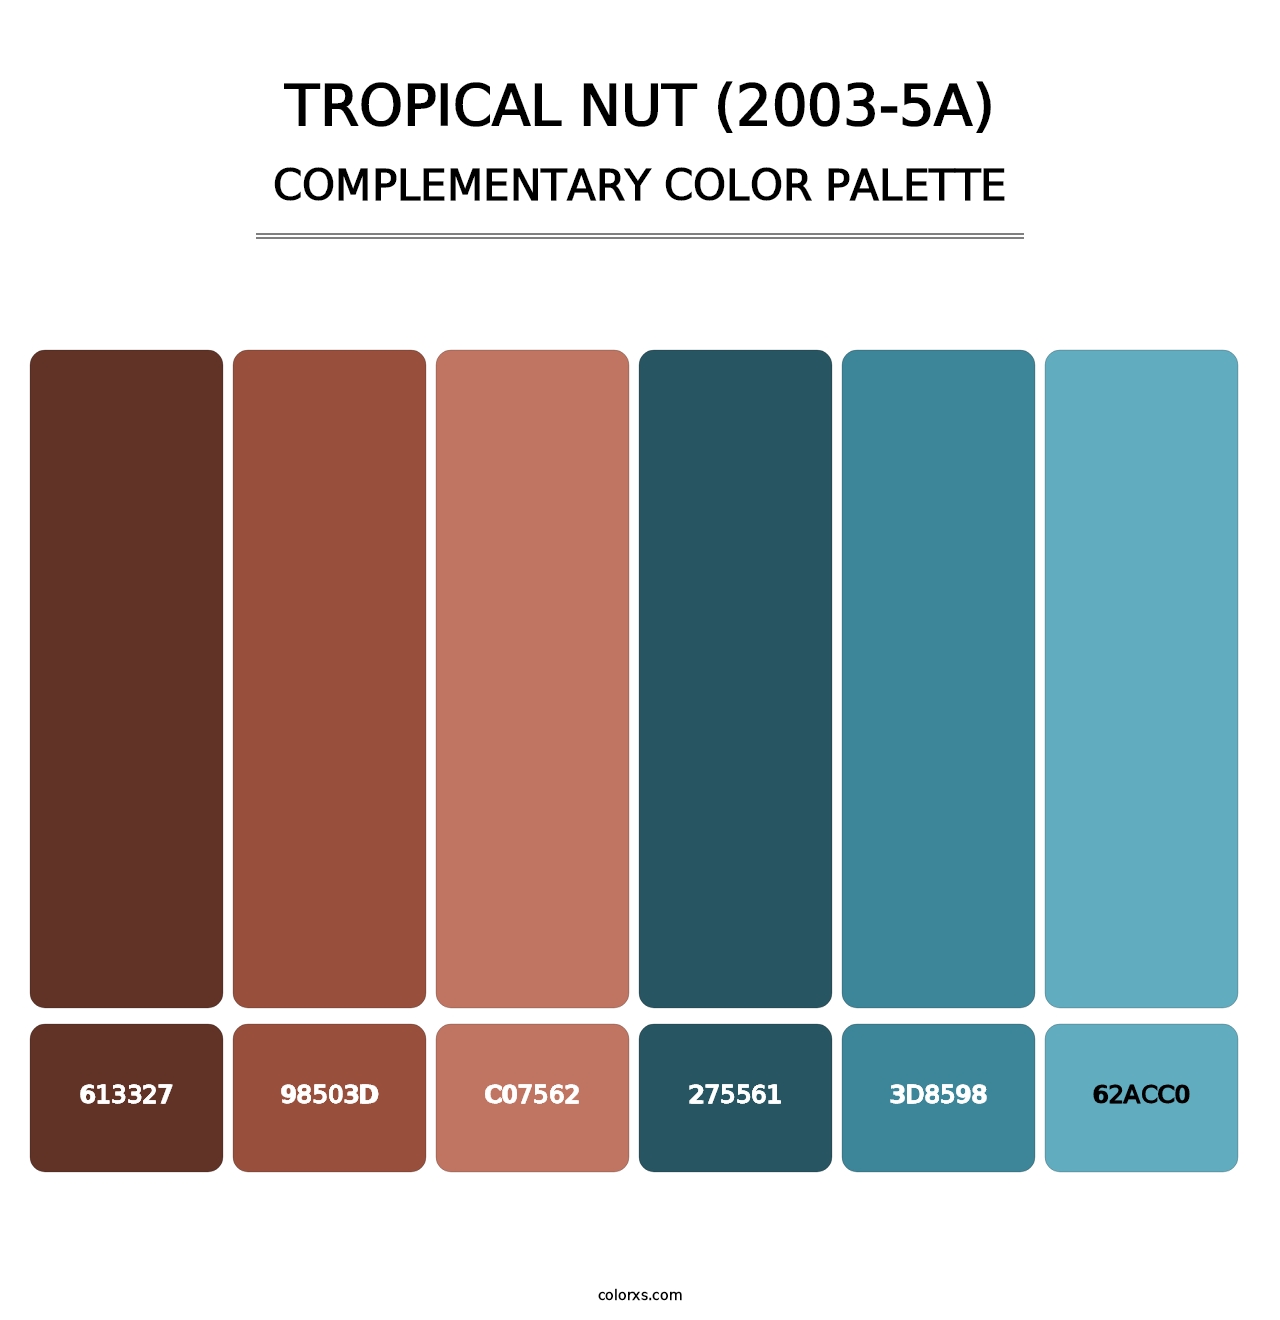 Tropical Nut (2003-5A) - Complementary Color Palette